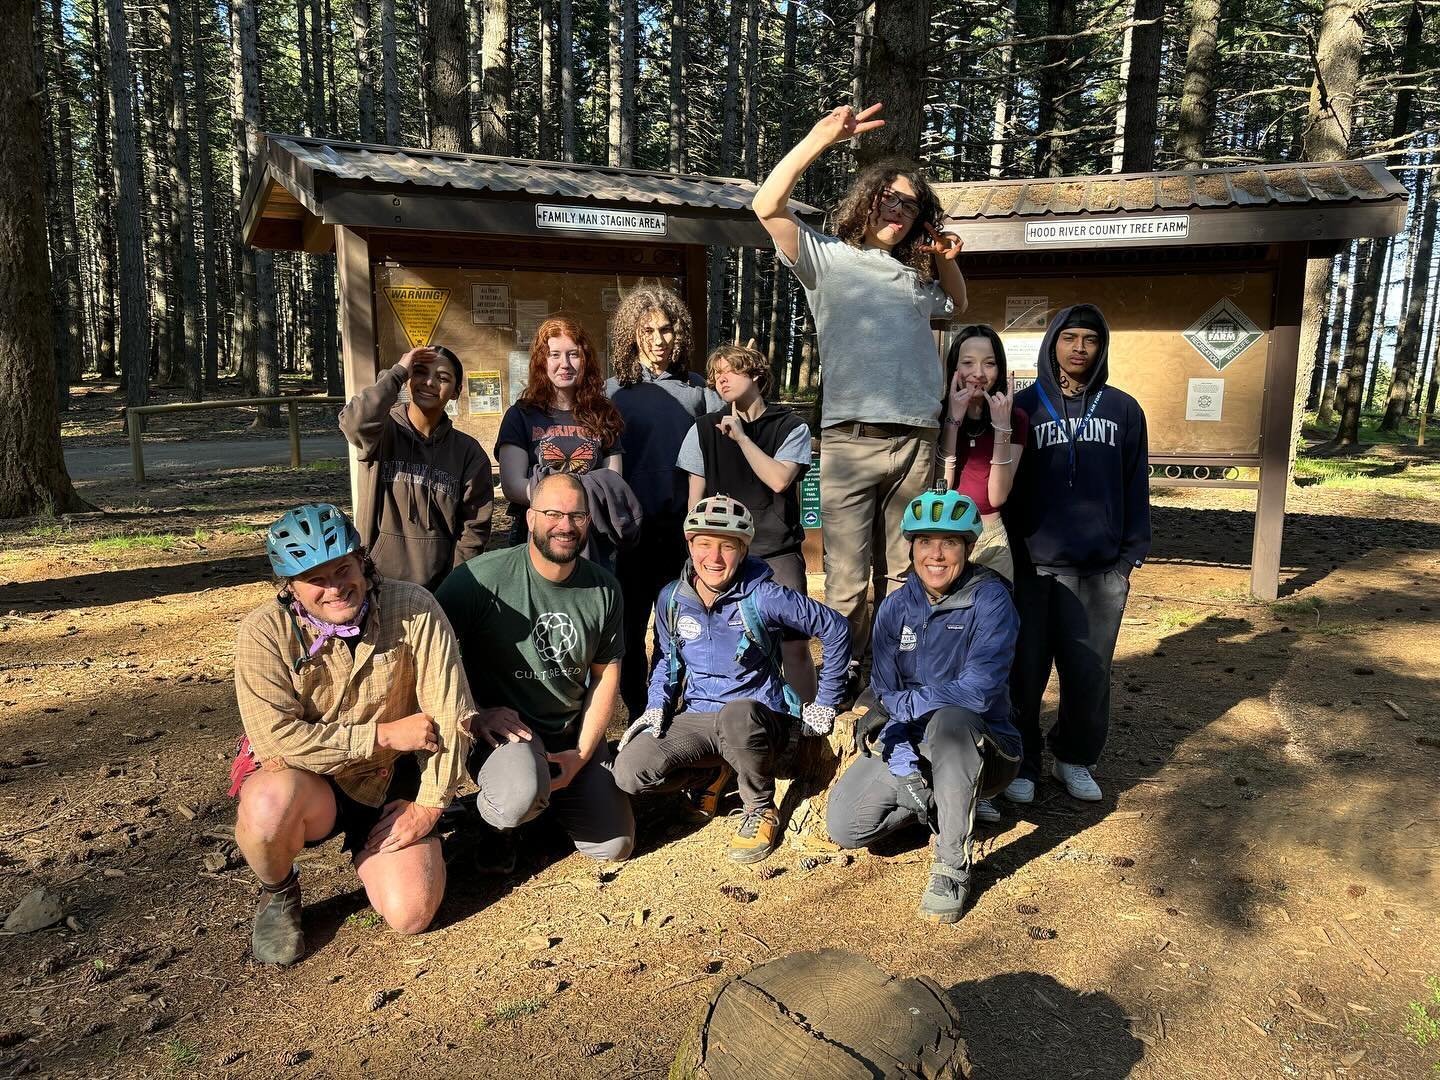 Fun and challenging day of skills and trail riding with @Brave.Endeavors 💪🏼
Thank you Bekah for the awesome instruction and Greg from @HoodRiverMountainBike for hooking us up with bikes!!! 🚲🚲🚲🚲🚲🚲💨

Andrew Jimenez, CultureSeed Program Directo